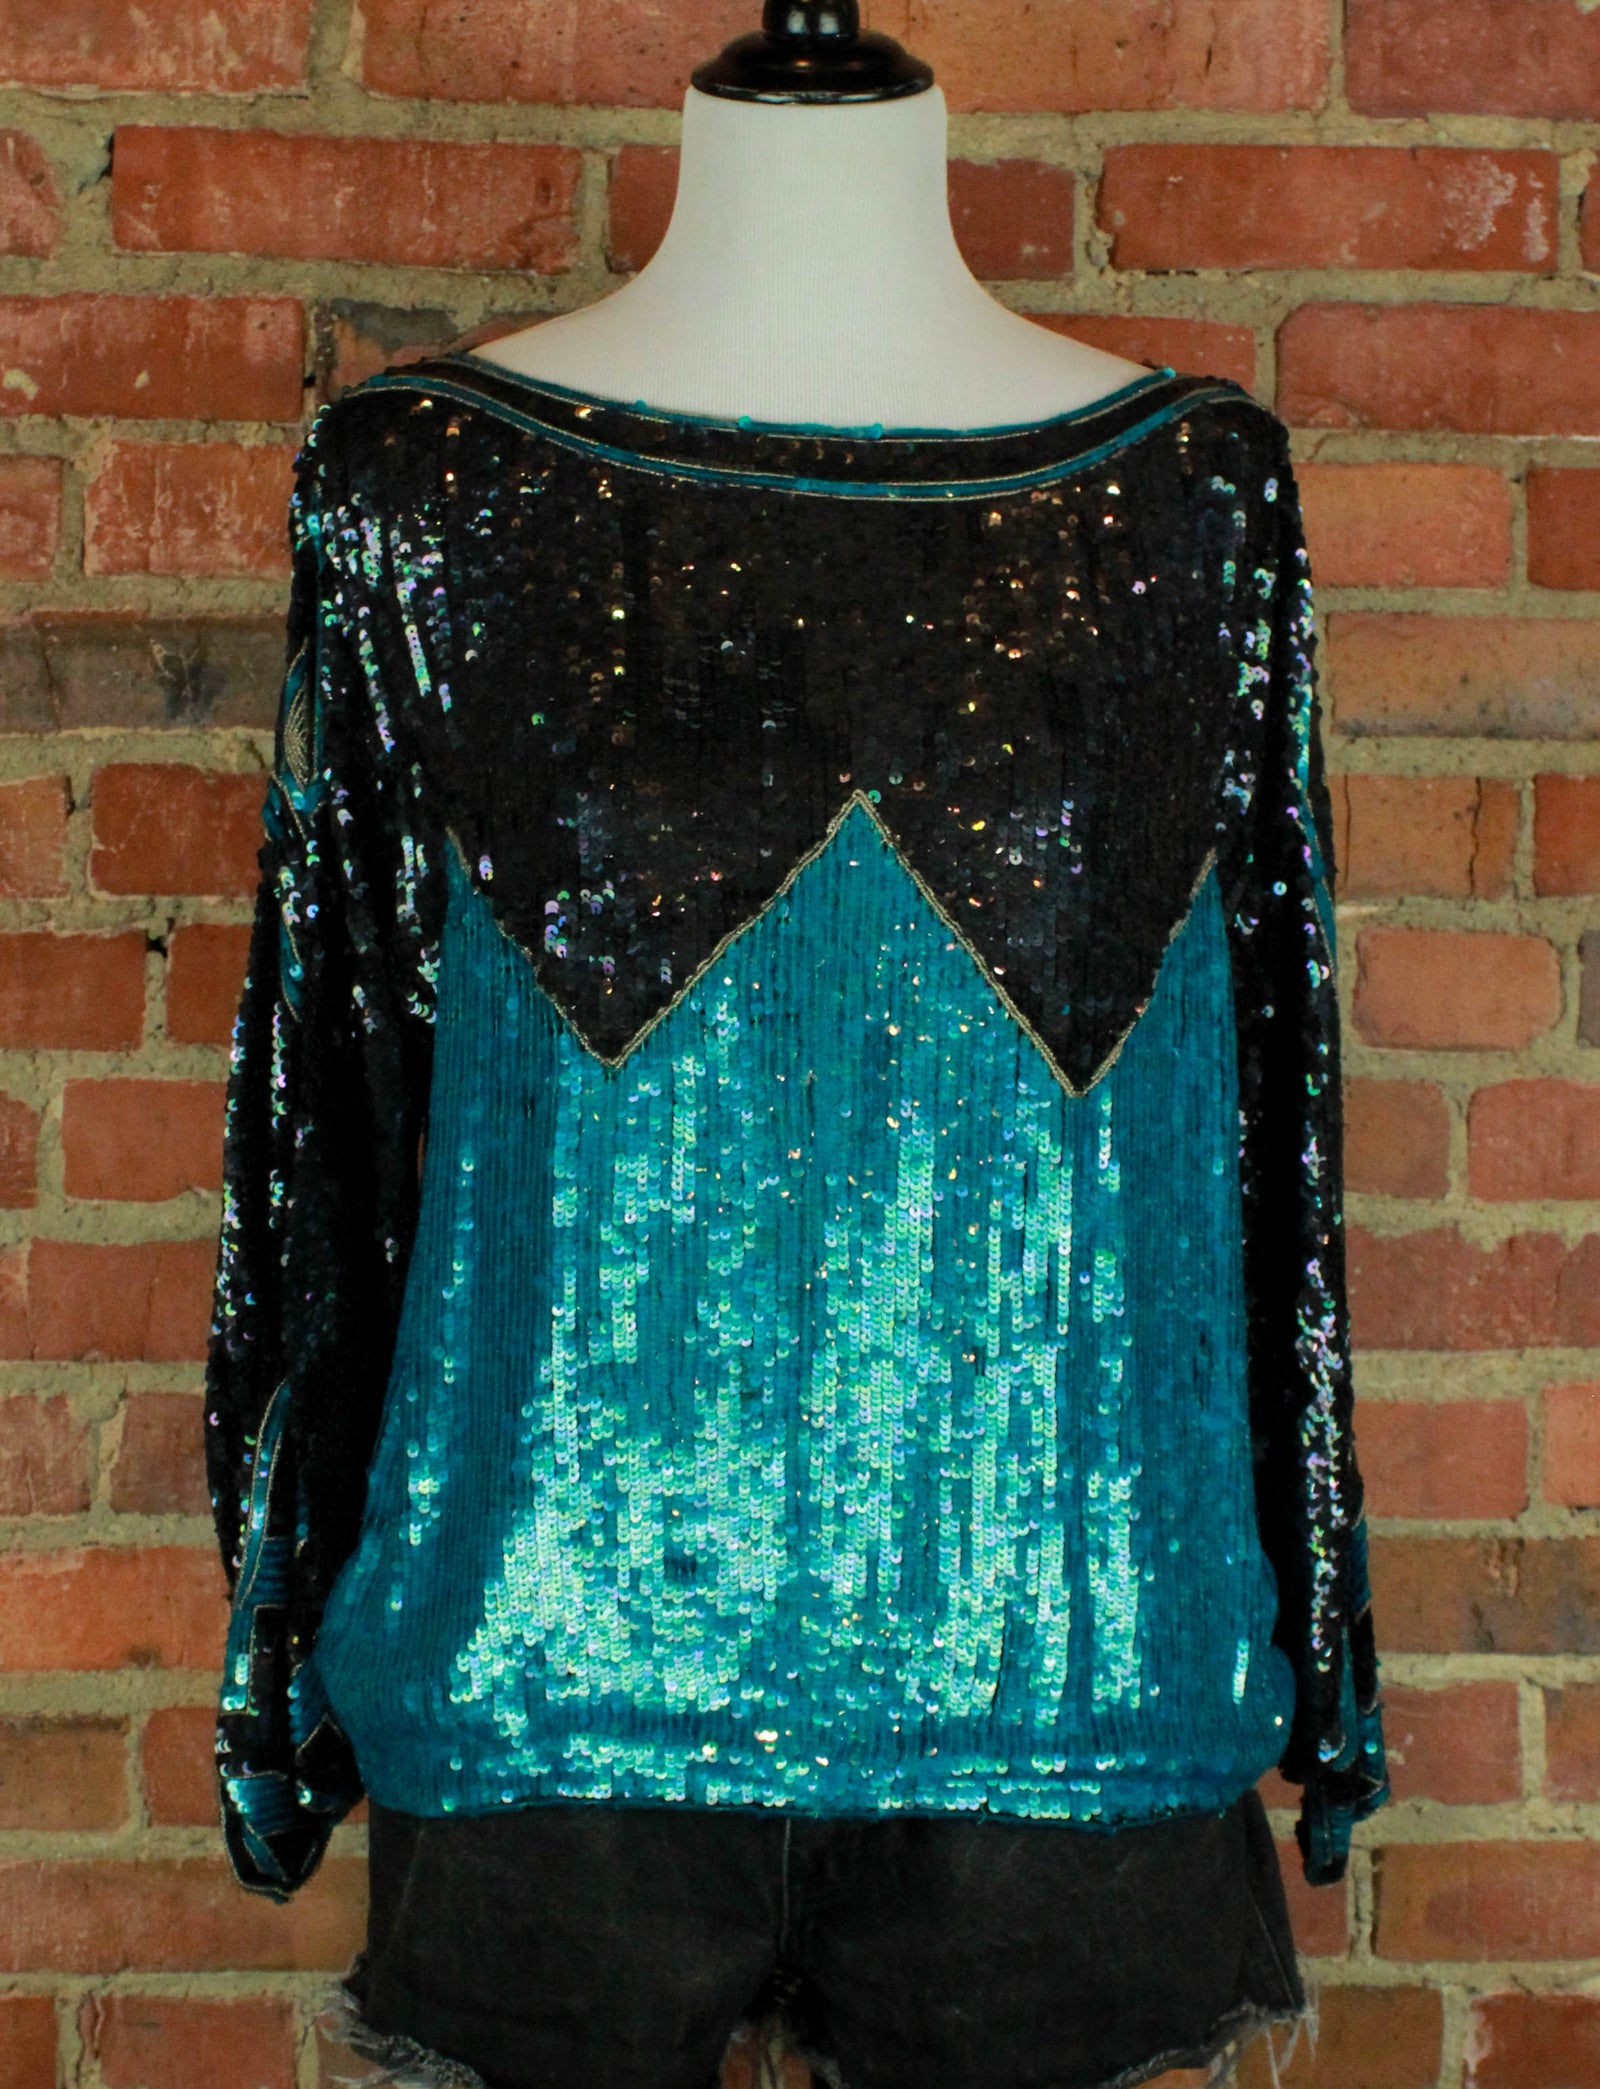 Women's Vintage Black And Teal Sequined Silk Blouse - Small